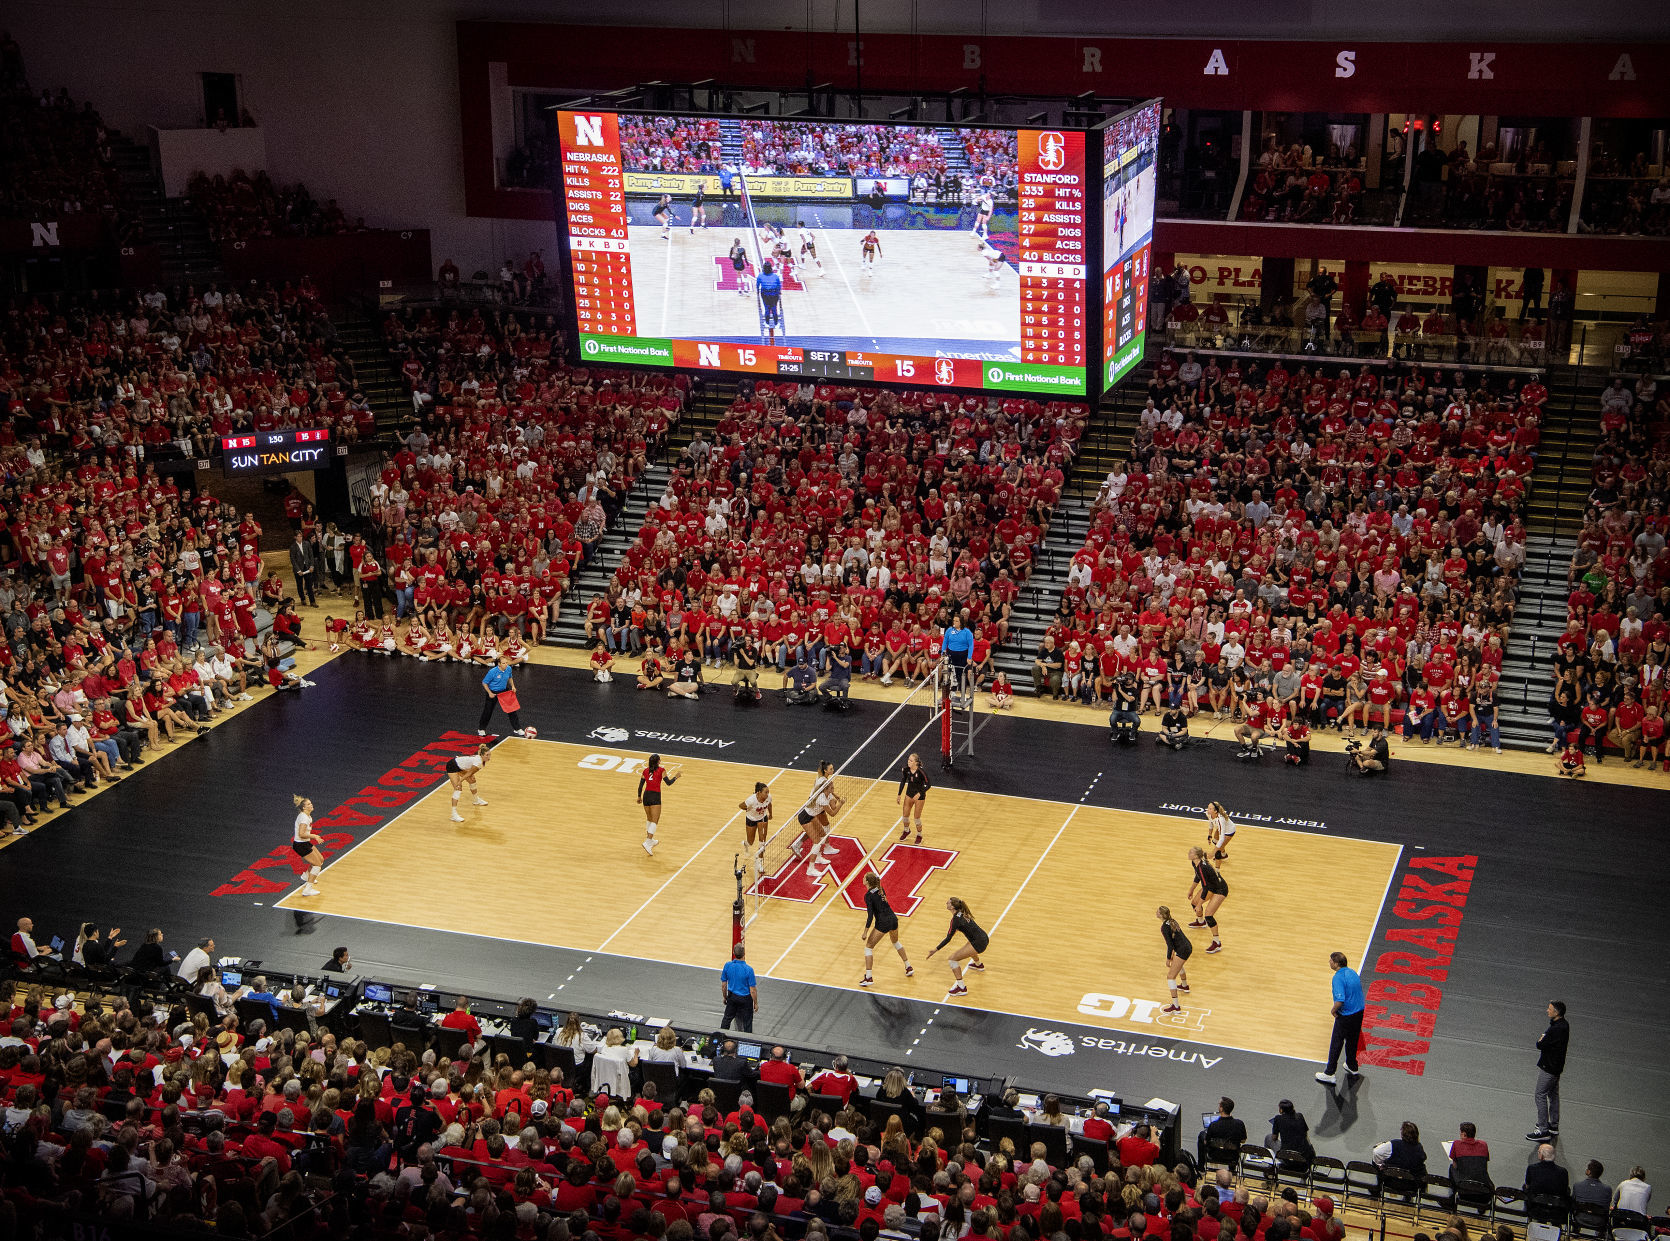 Volleyball fans encouraged to arrive early for Saturday match